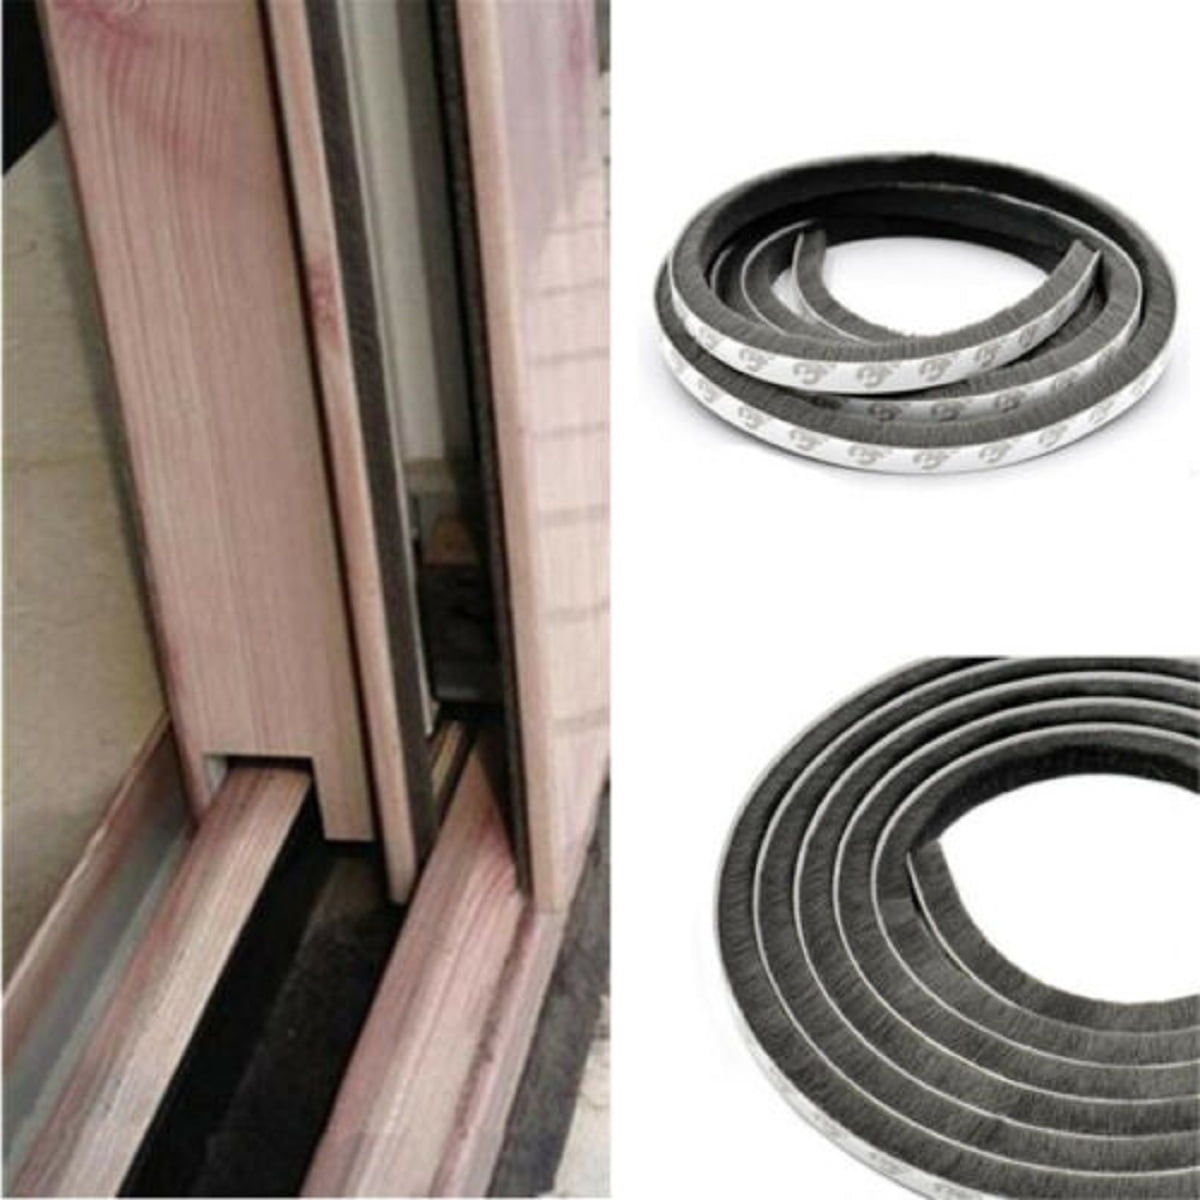 Details about   Gadgets Door and window seal Pile Weatherstrip Sealing Strip Self Adhesive 